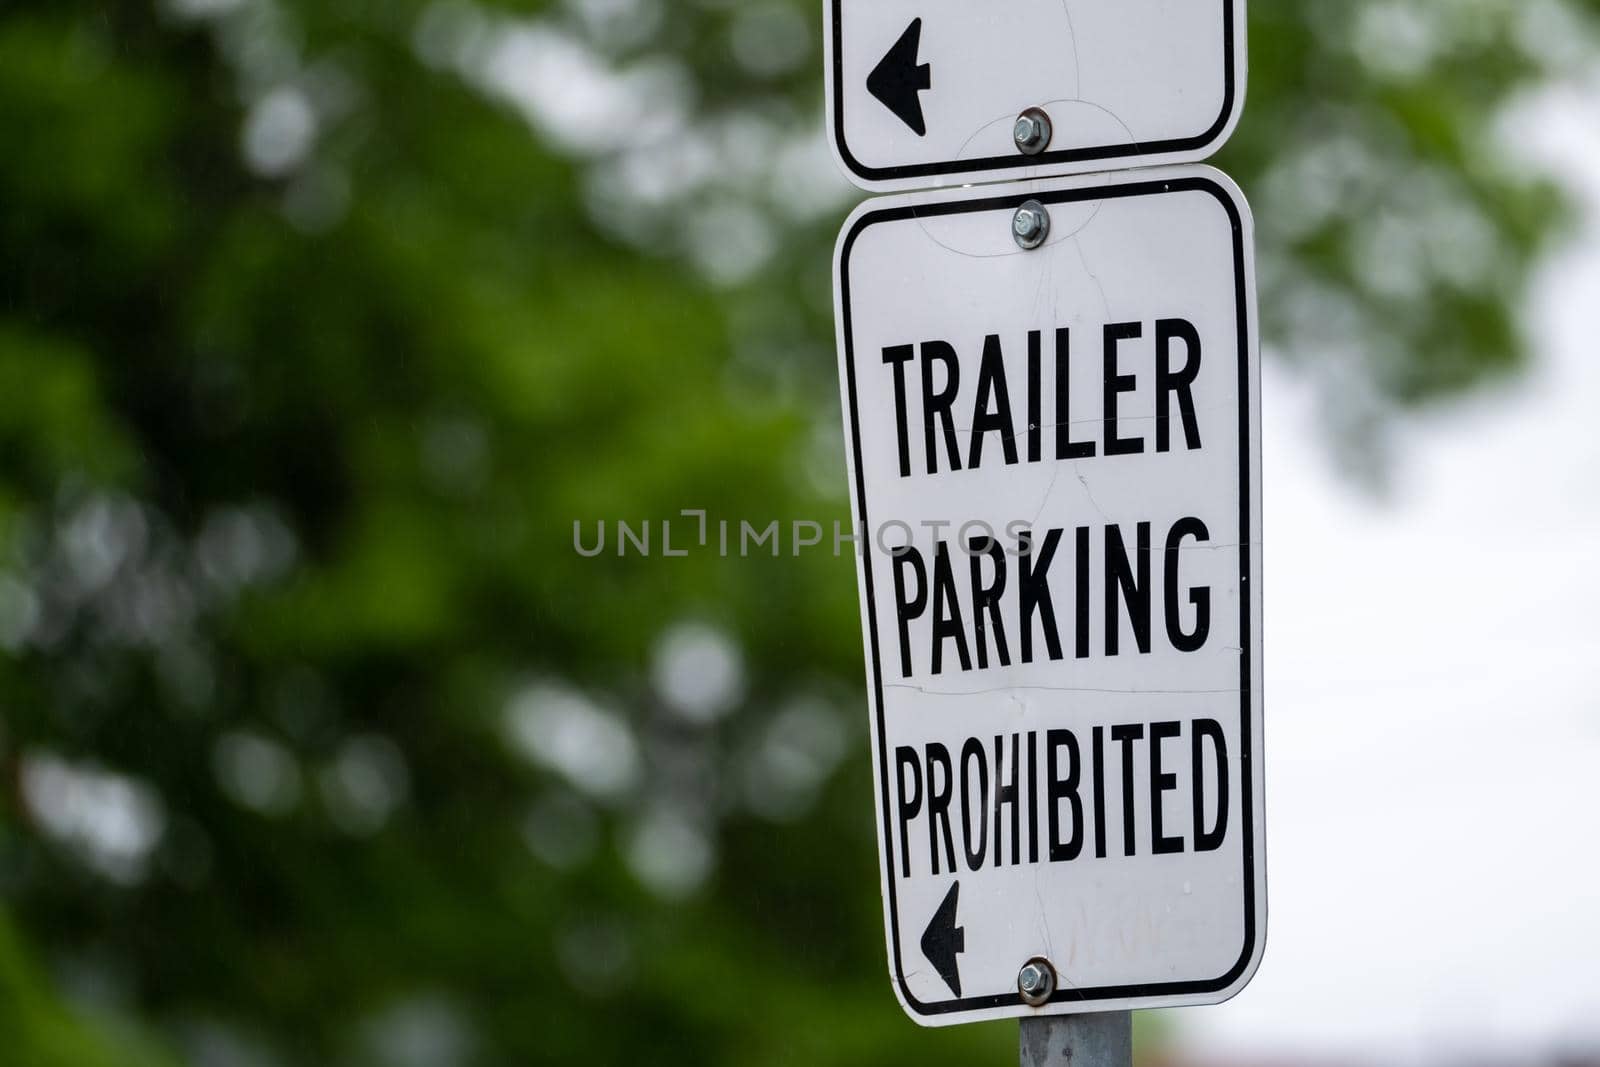 Close-up of a metal sign that says "Trailer Parking Prohibited".